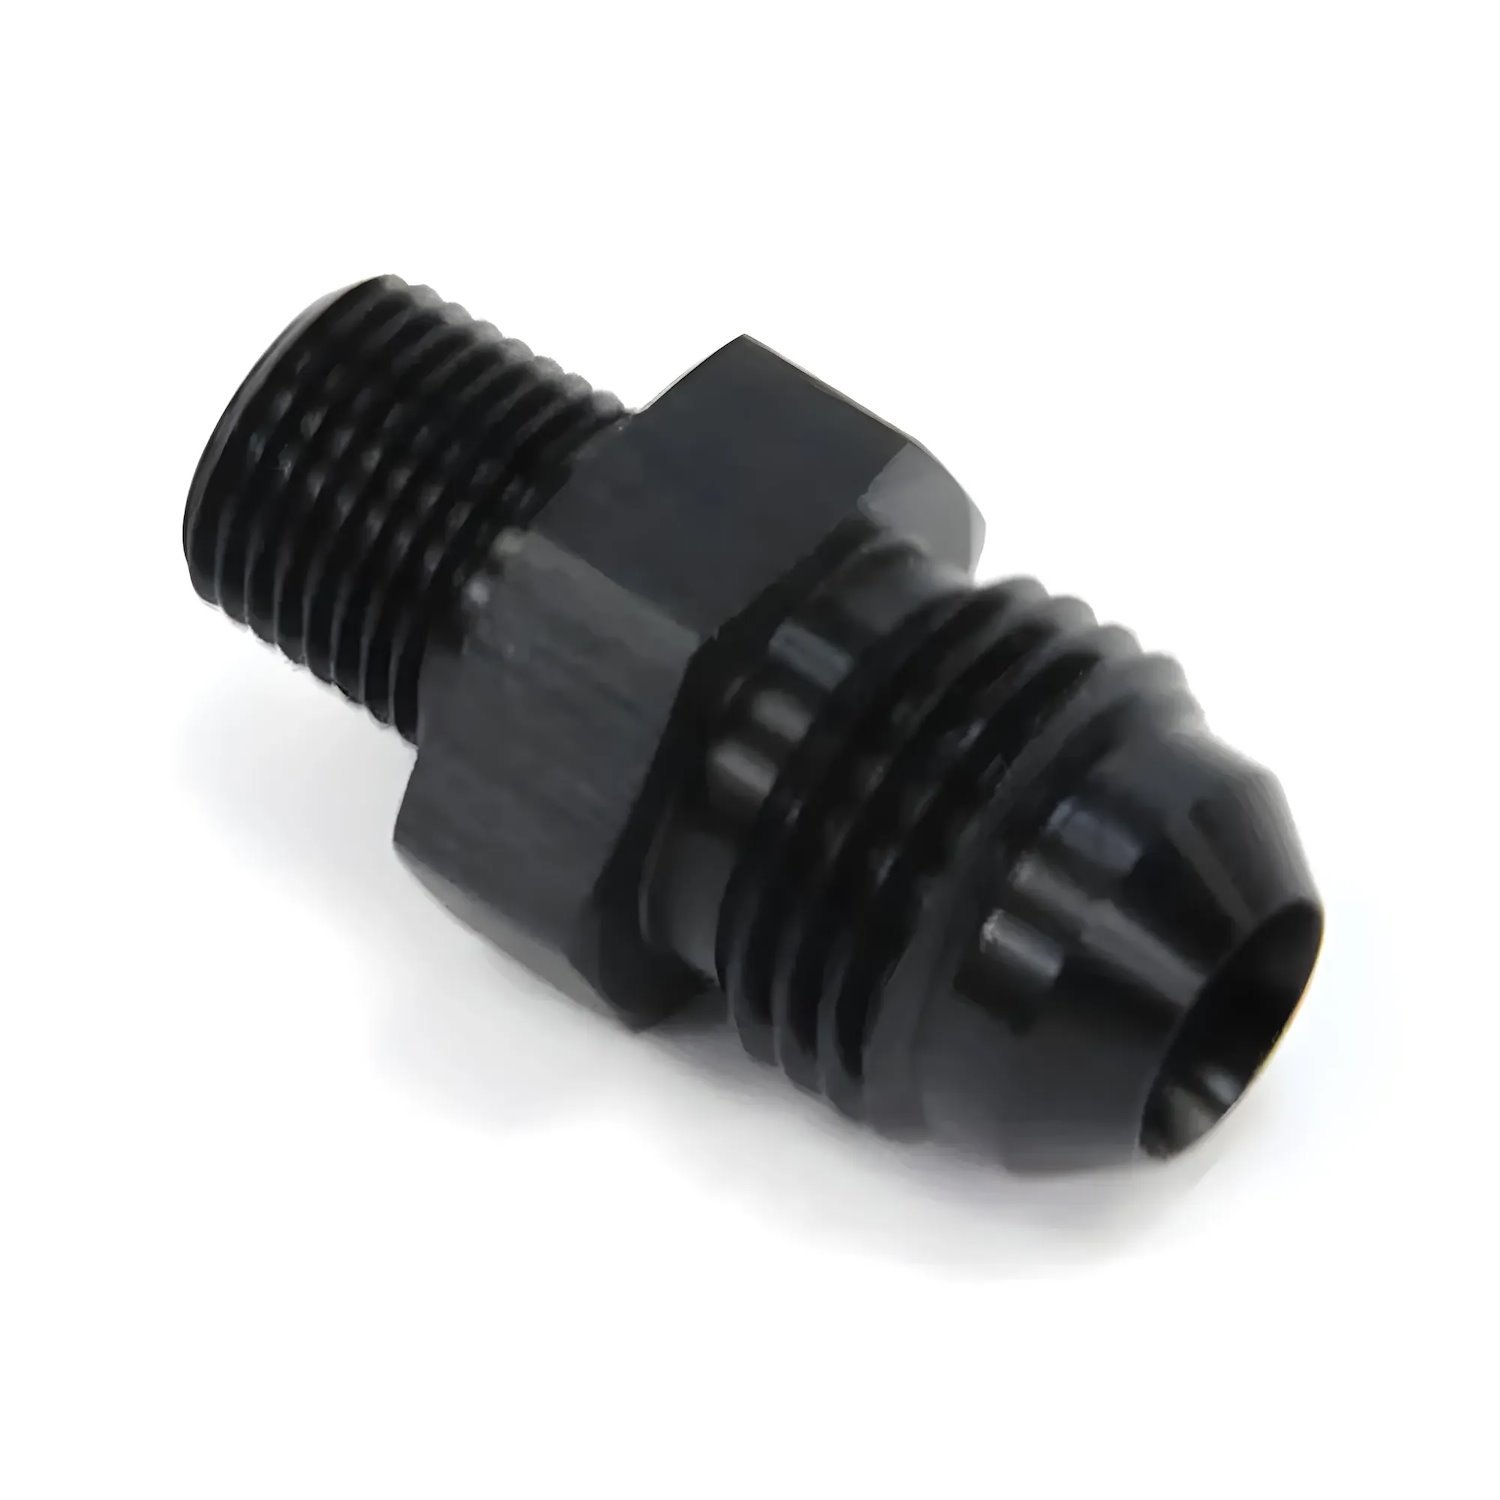 00-01153 1/8 in. NPT x 6AN Straight Fitting, Male/Male, Black